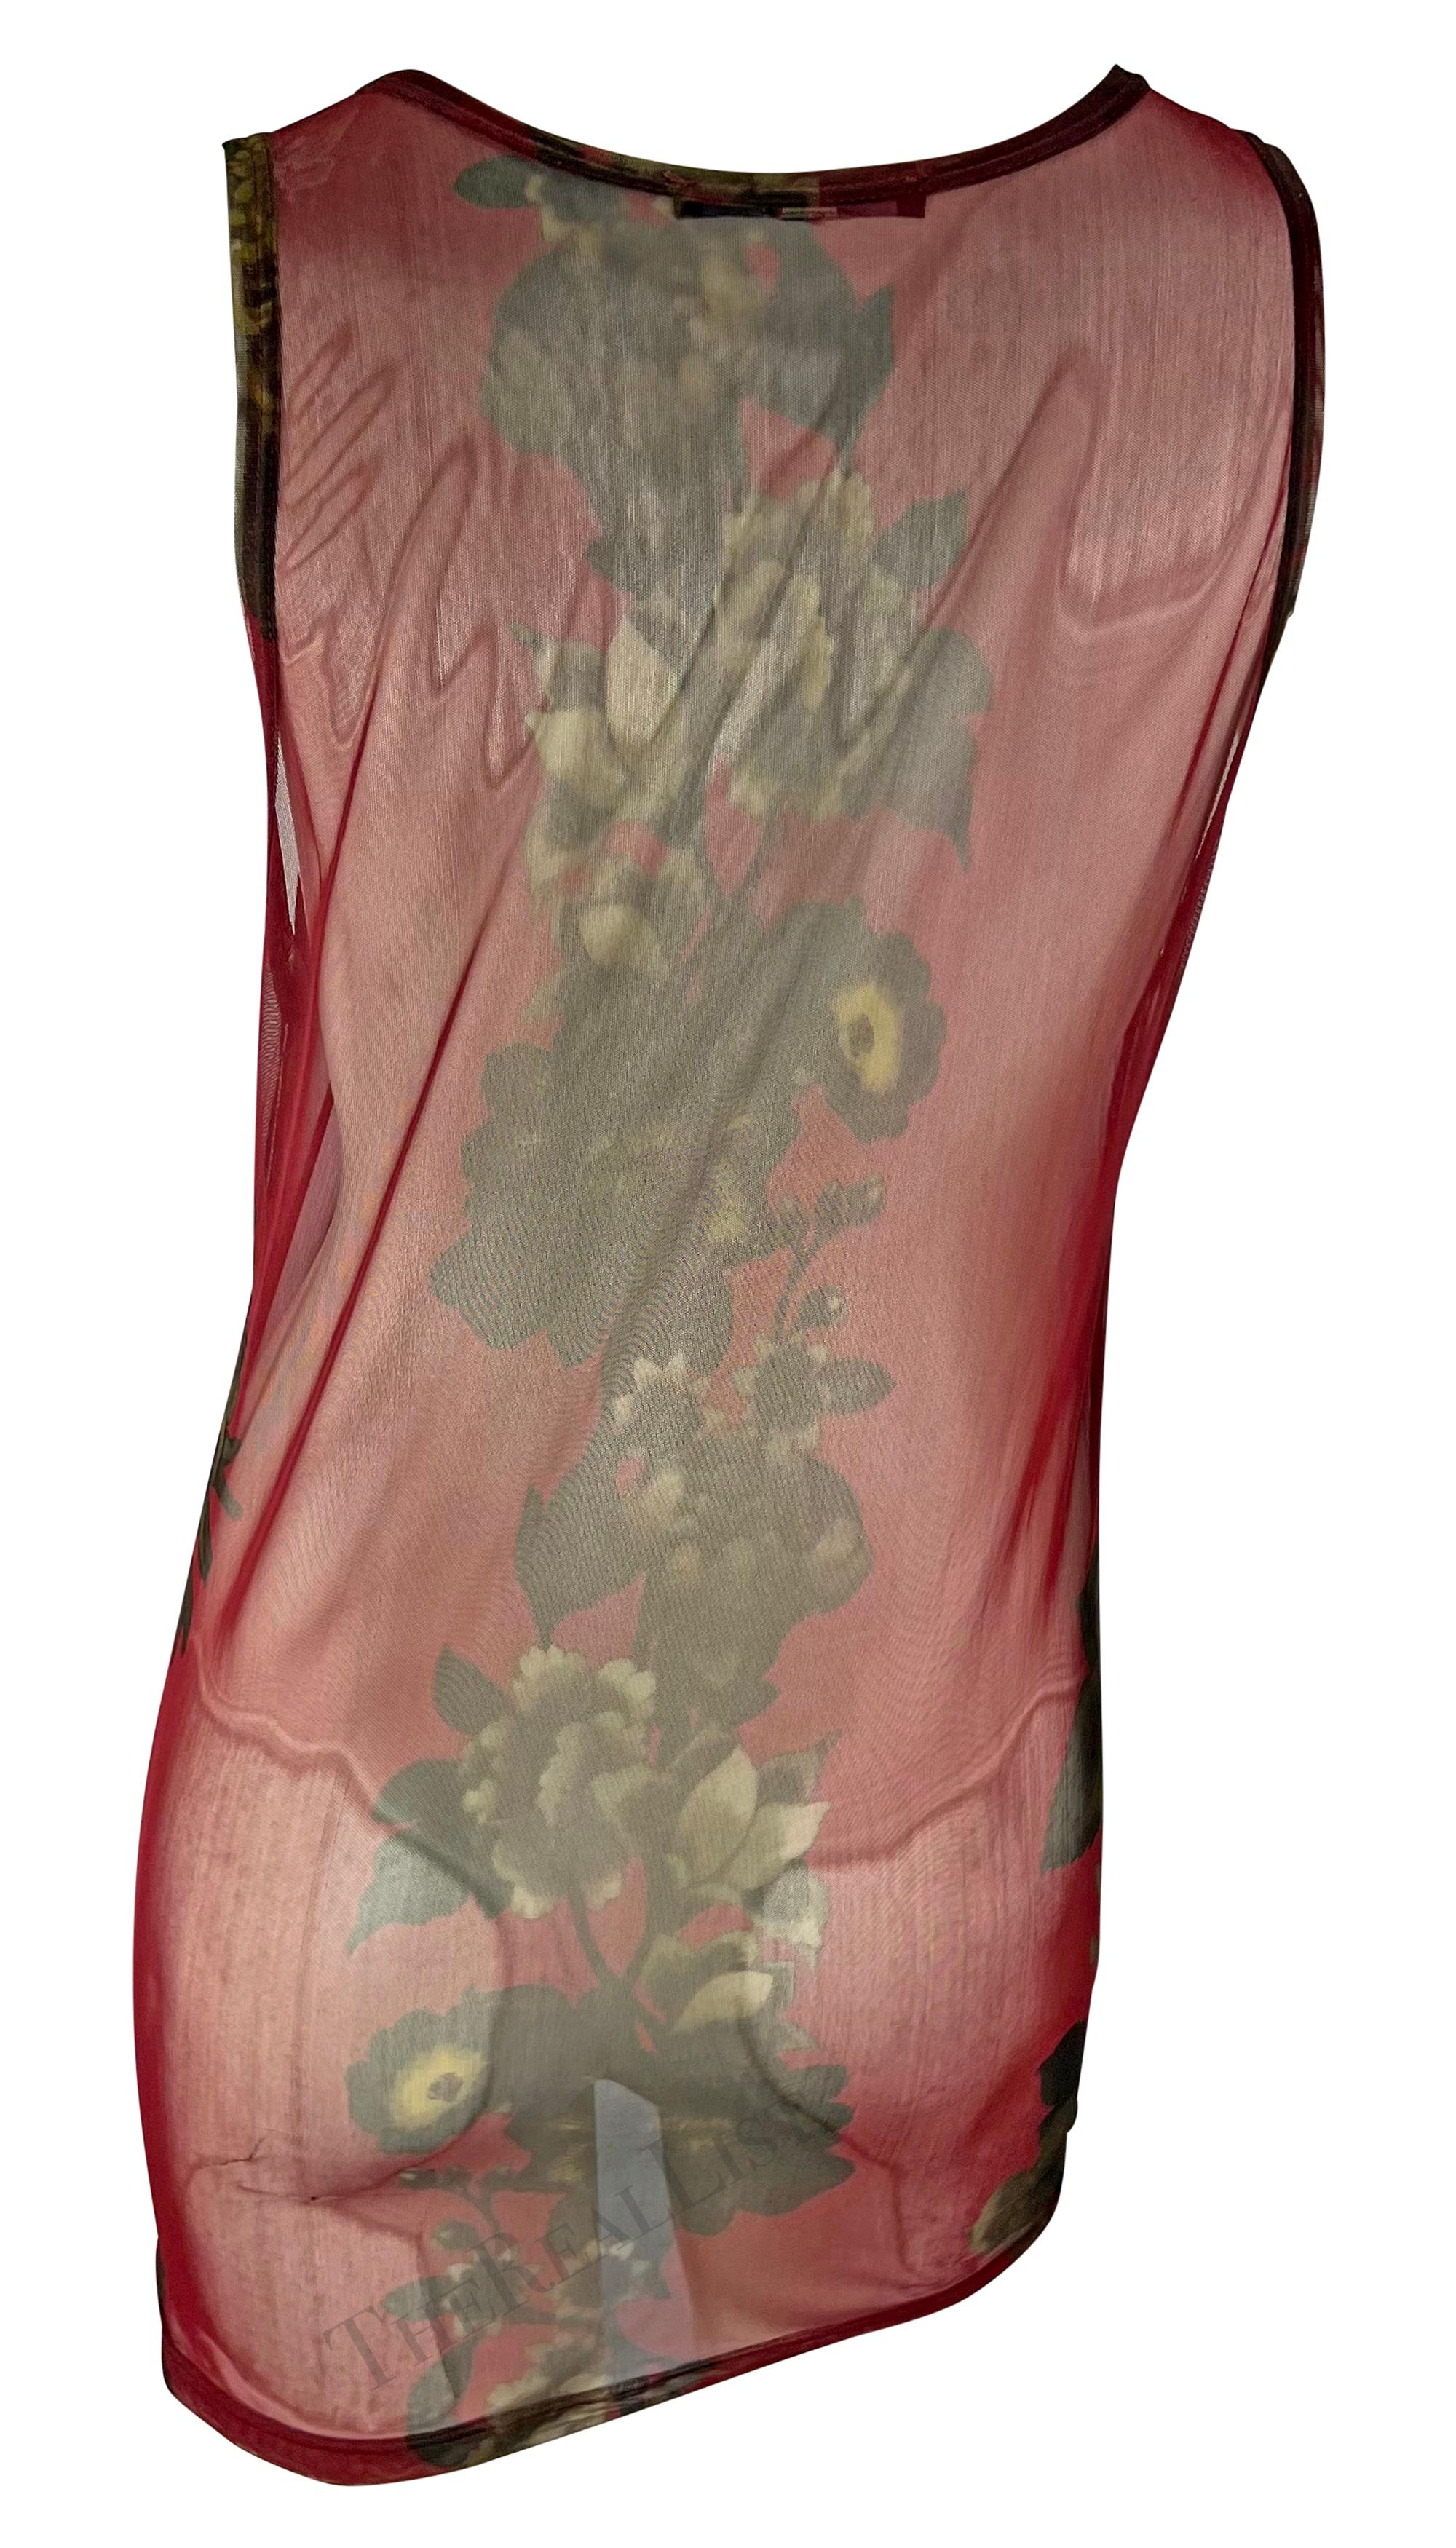 S/S 1999 Gucci by Tom Ford Red Floral Sheer Men's Burgundy Tank Top Mini Dress For Sale 2